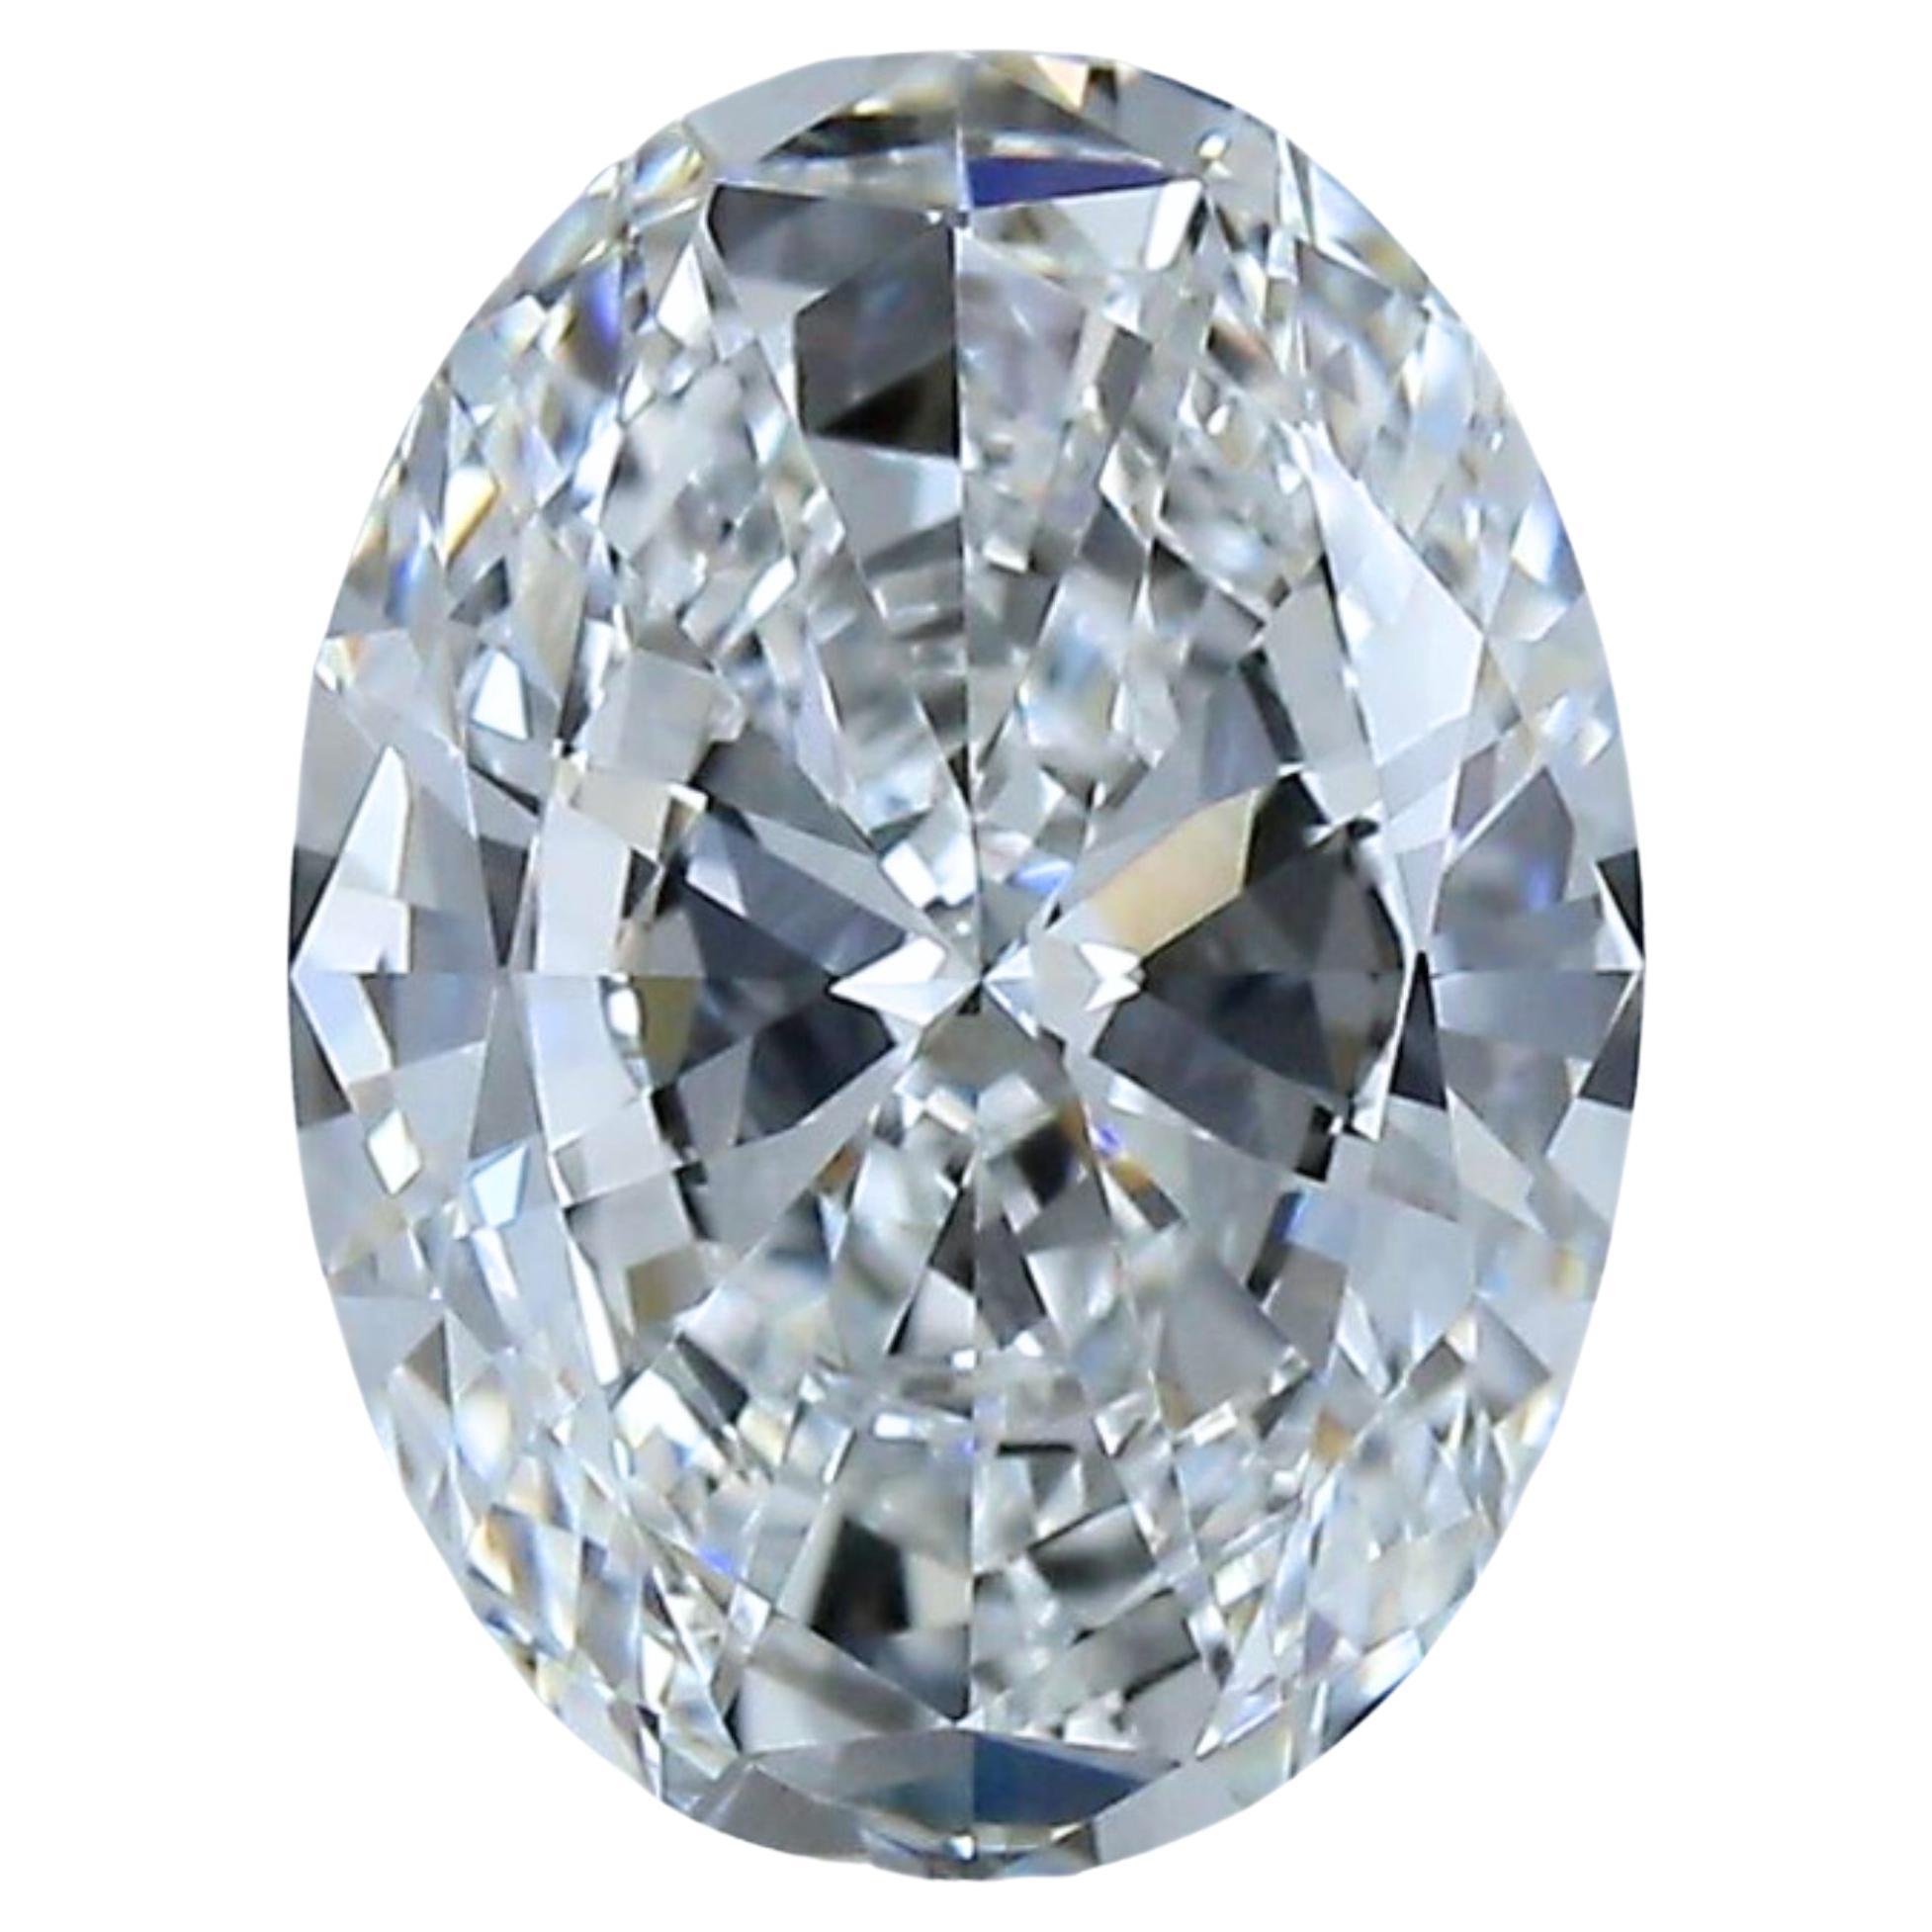 1pc Glamorous Natural cut Oval diamond in a 1.50 carat